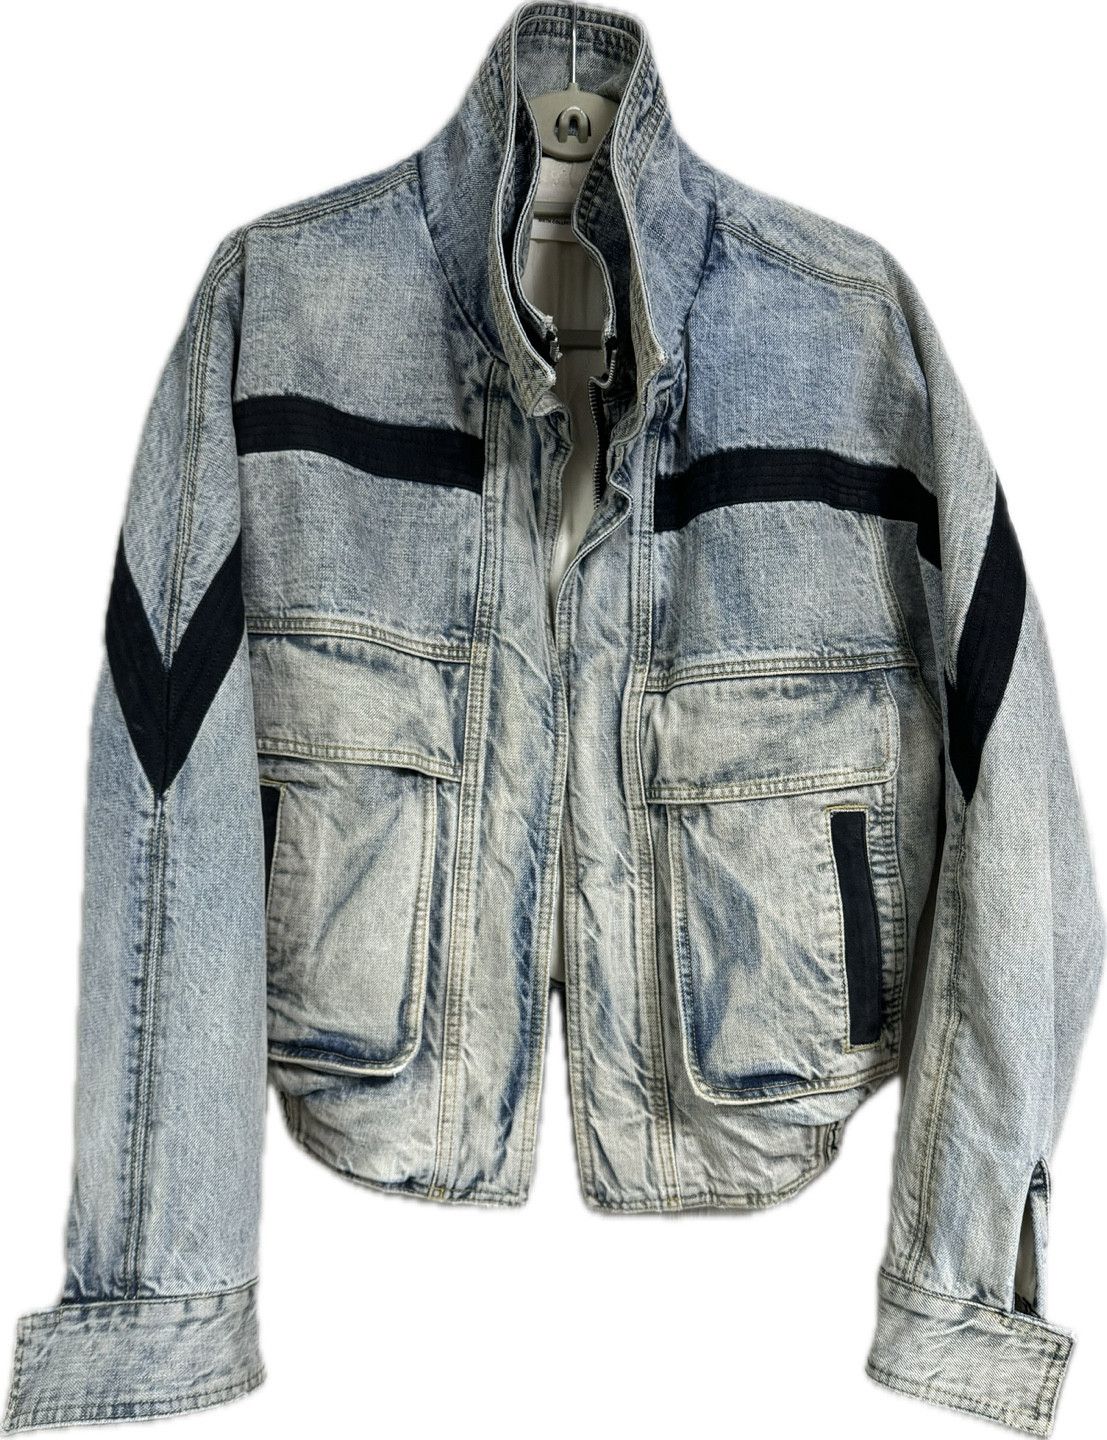 Fear of God 6th Collection Vintage Heavy Weight Denim Ski Jacket 